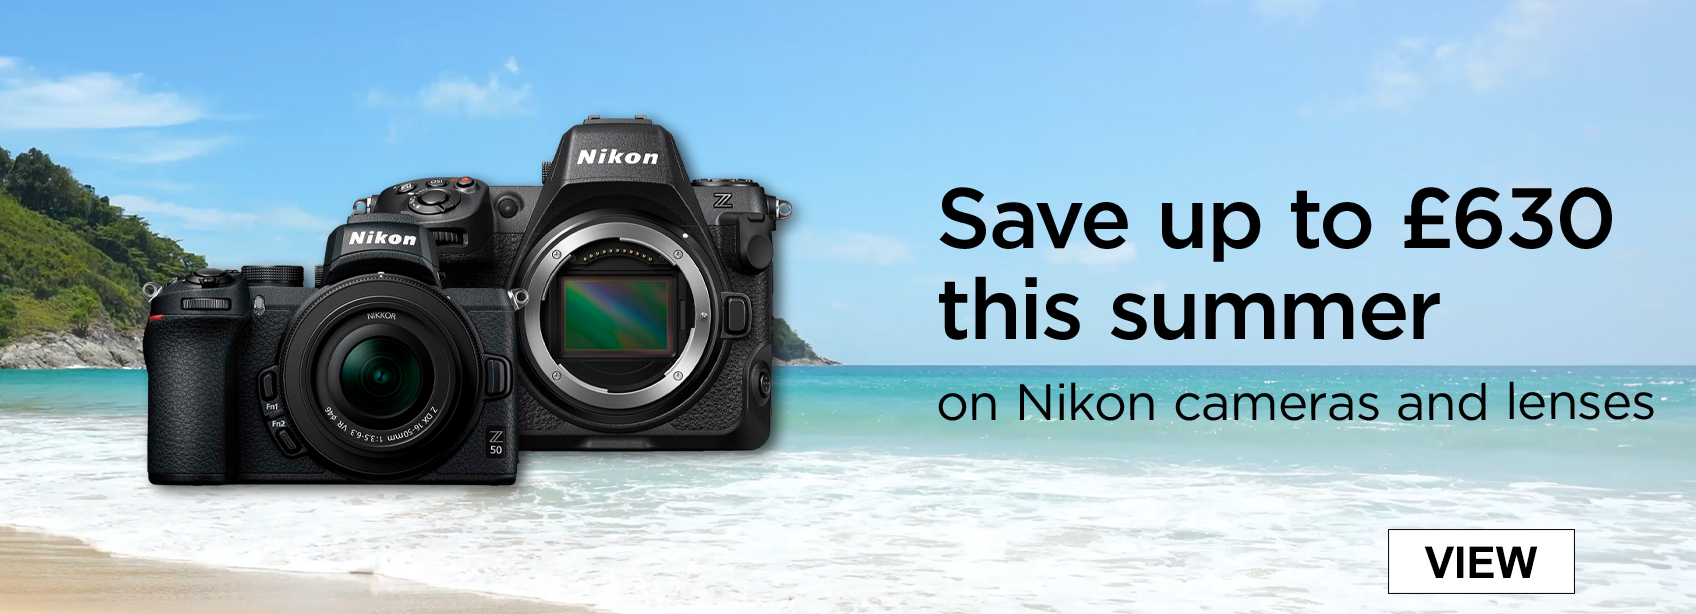 Save up to £630 this Summer on Nikon Cameras and Lenses